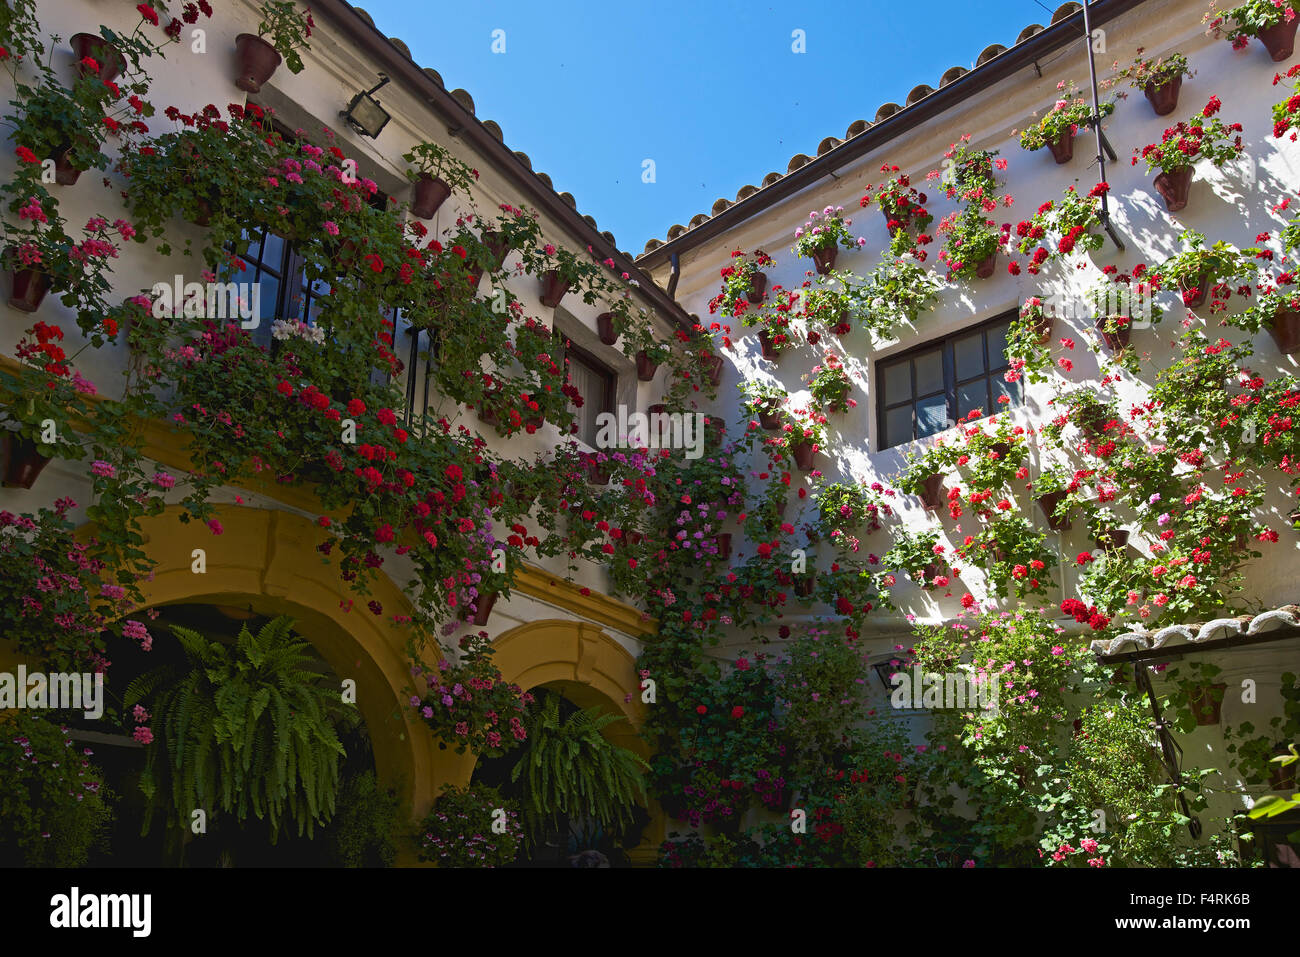 Andalusia, Spain, Europe, outside, day, Cordoba, Fiesta de los patios, tradition, traditional, floral decoration, flower, nobody Stock Photo